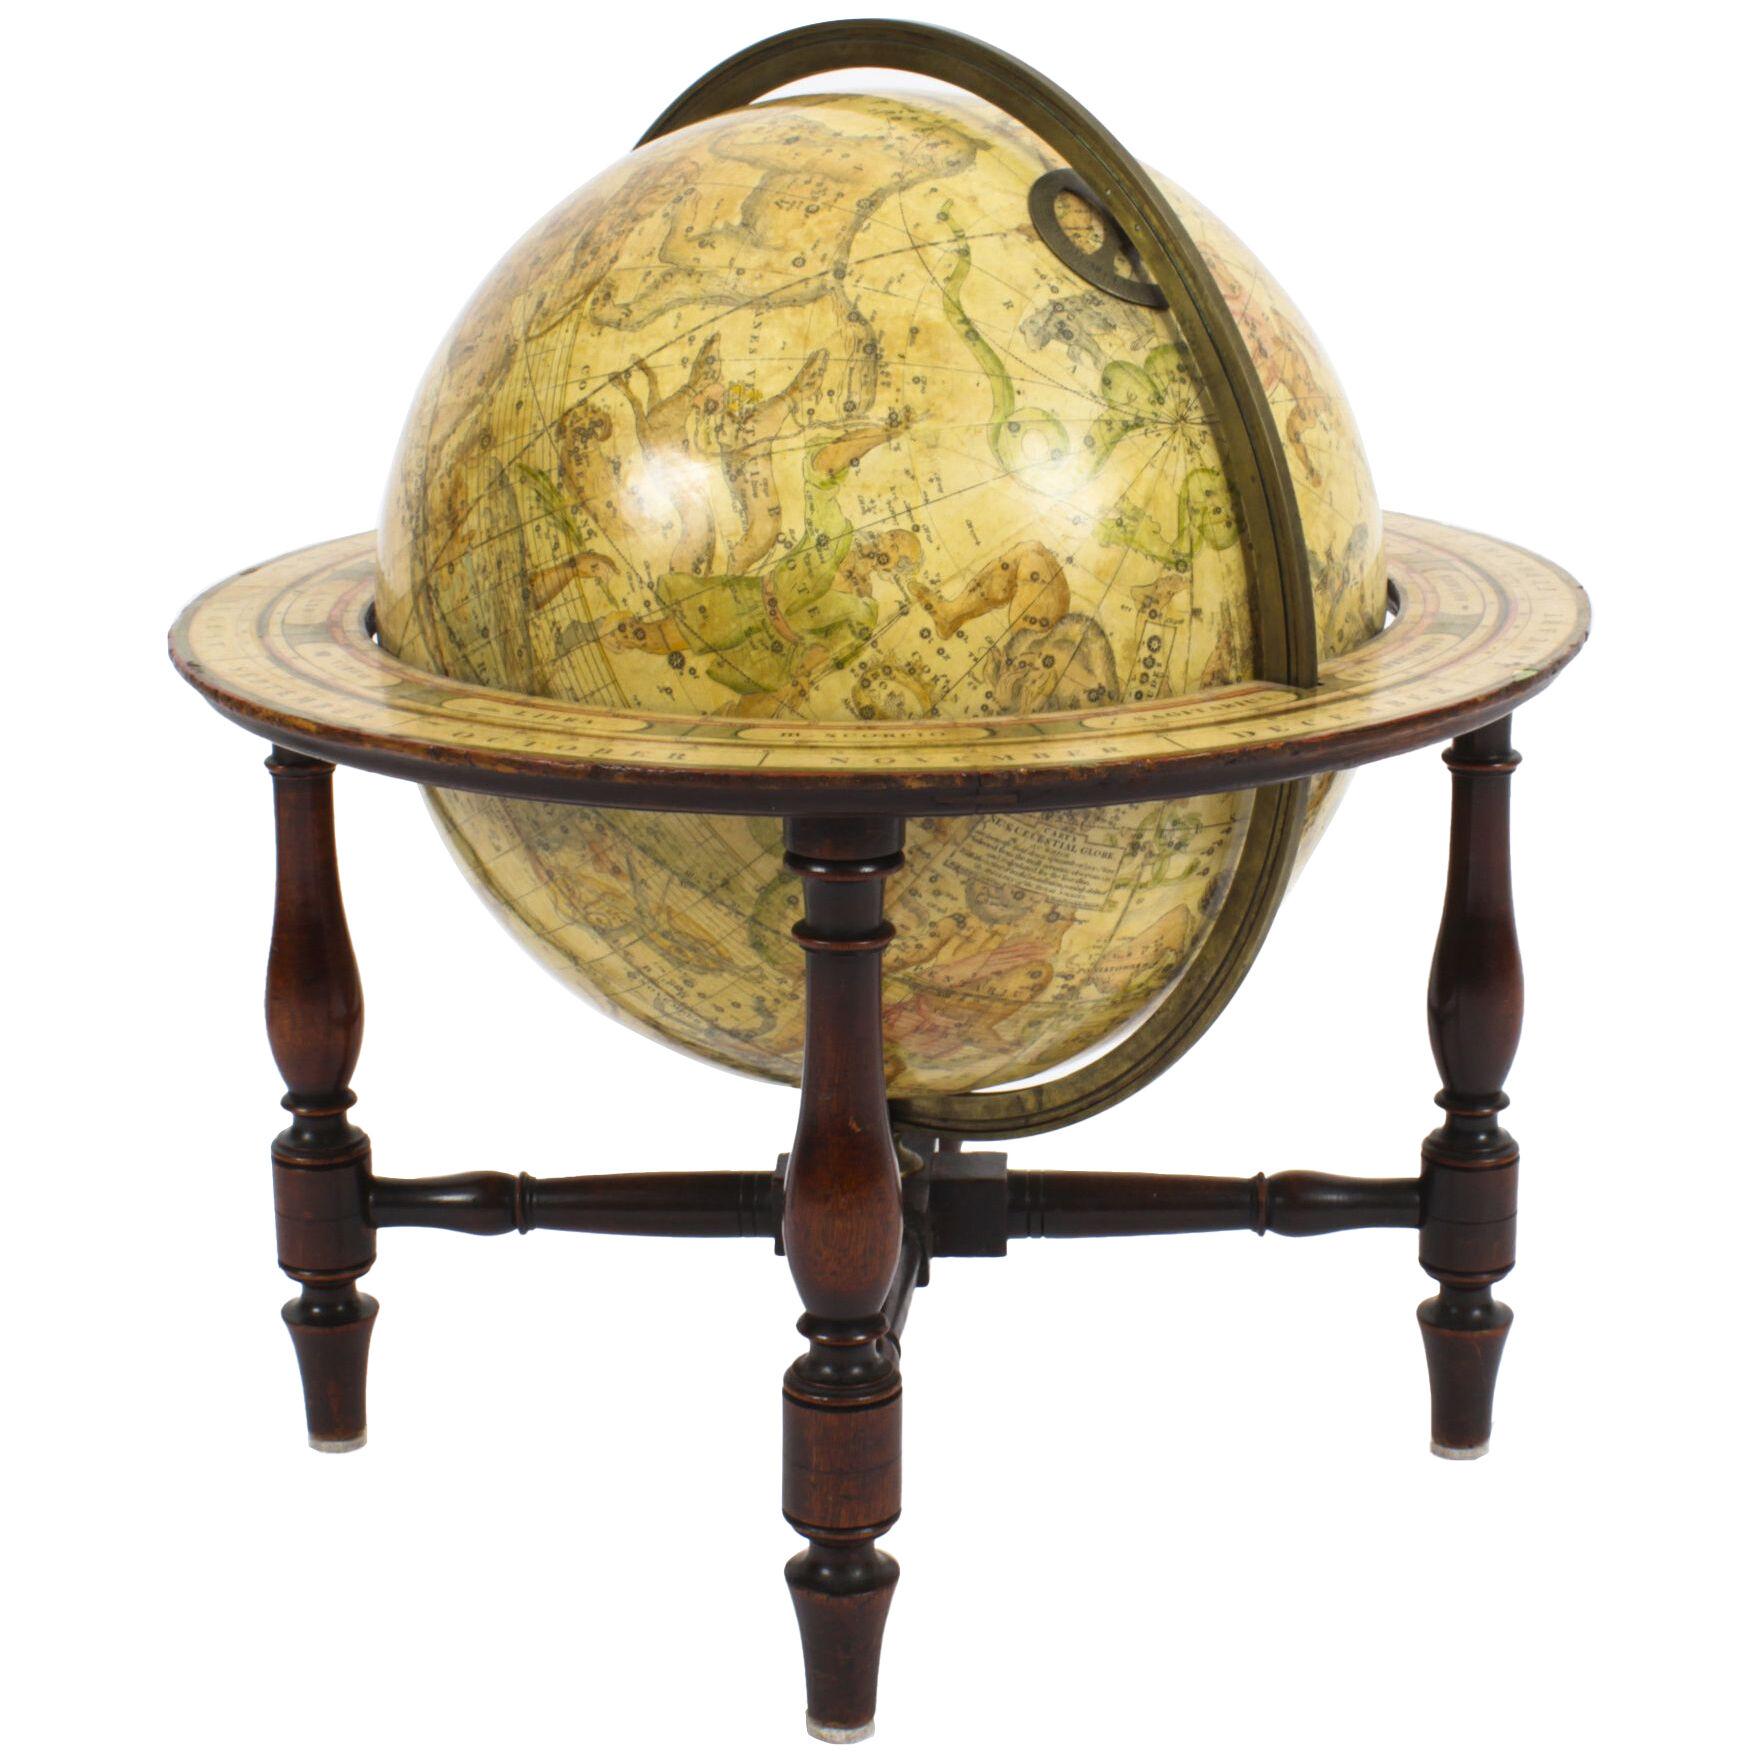 Antique 12" Cary's New Celestial Library Table Globe On Stand 19th C